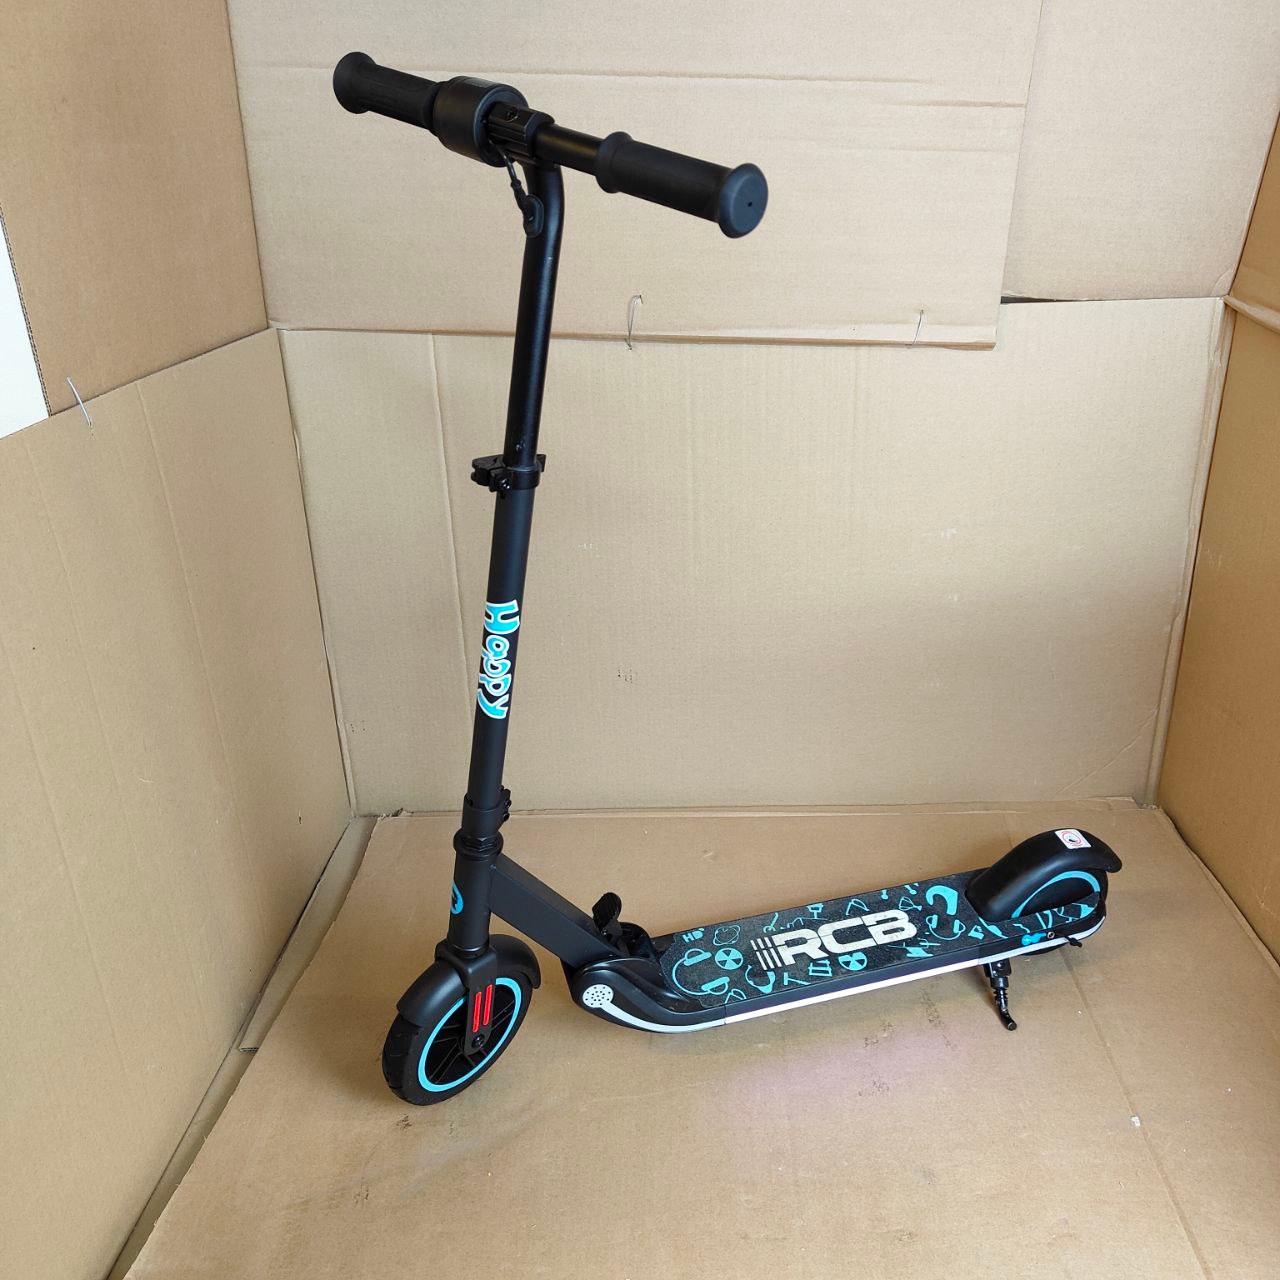 RCB Electric Scooter for Kids 6-12 Years, 150W, 3-Speed Modes, 9.3mph - Massive Discounts